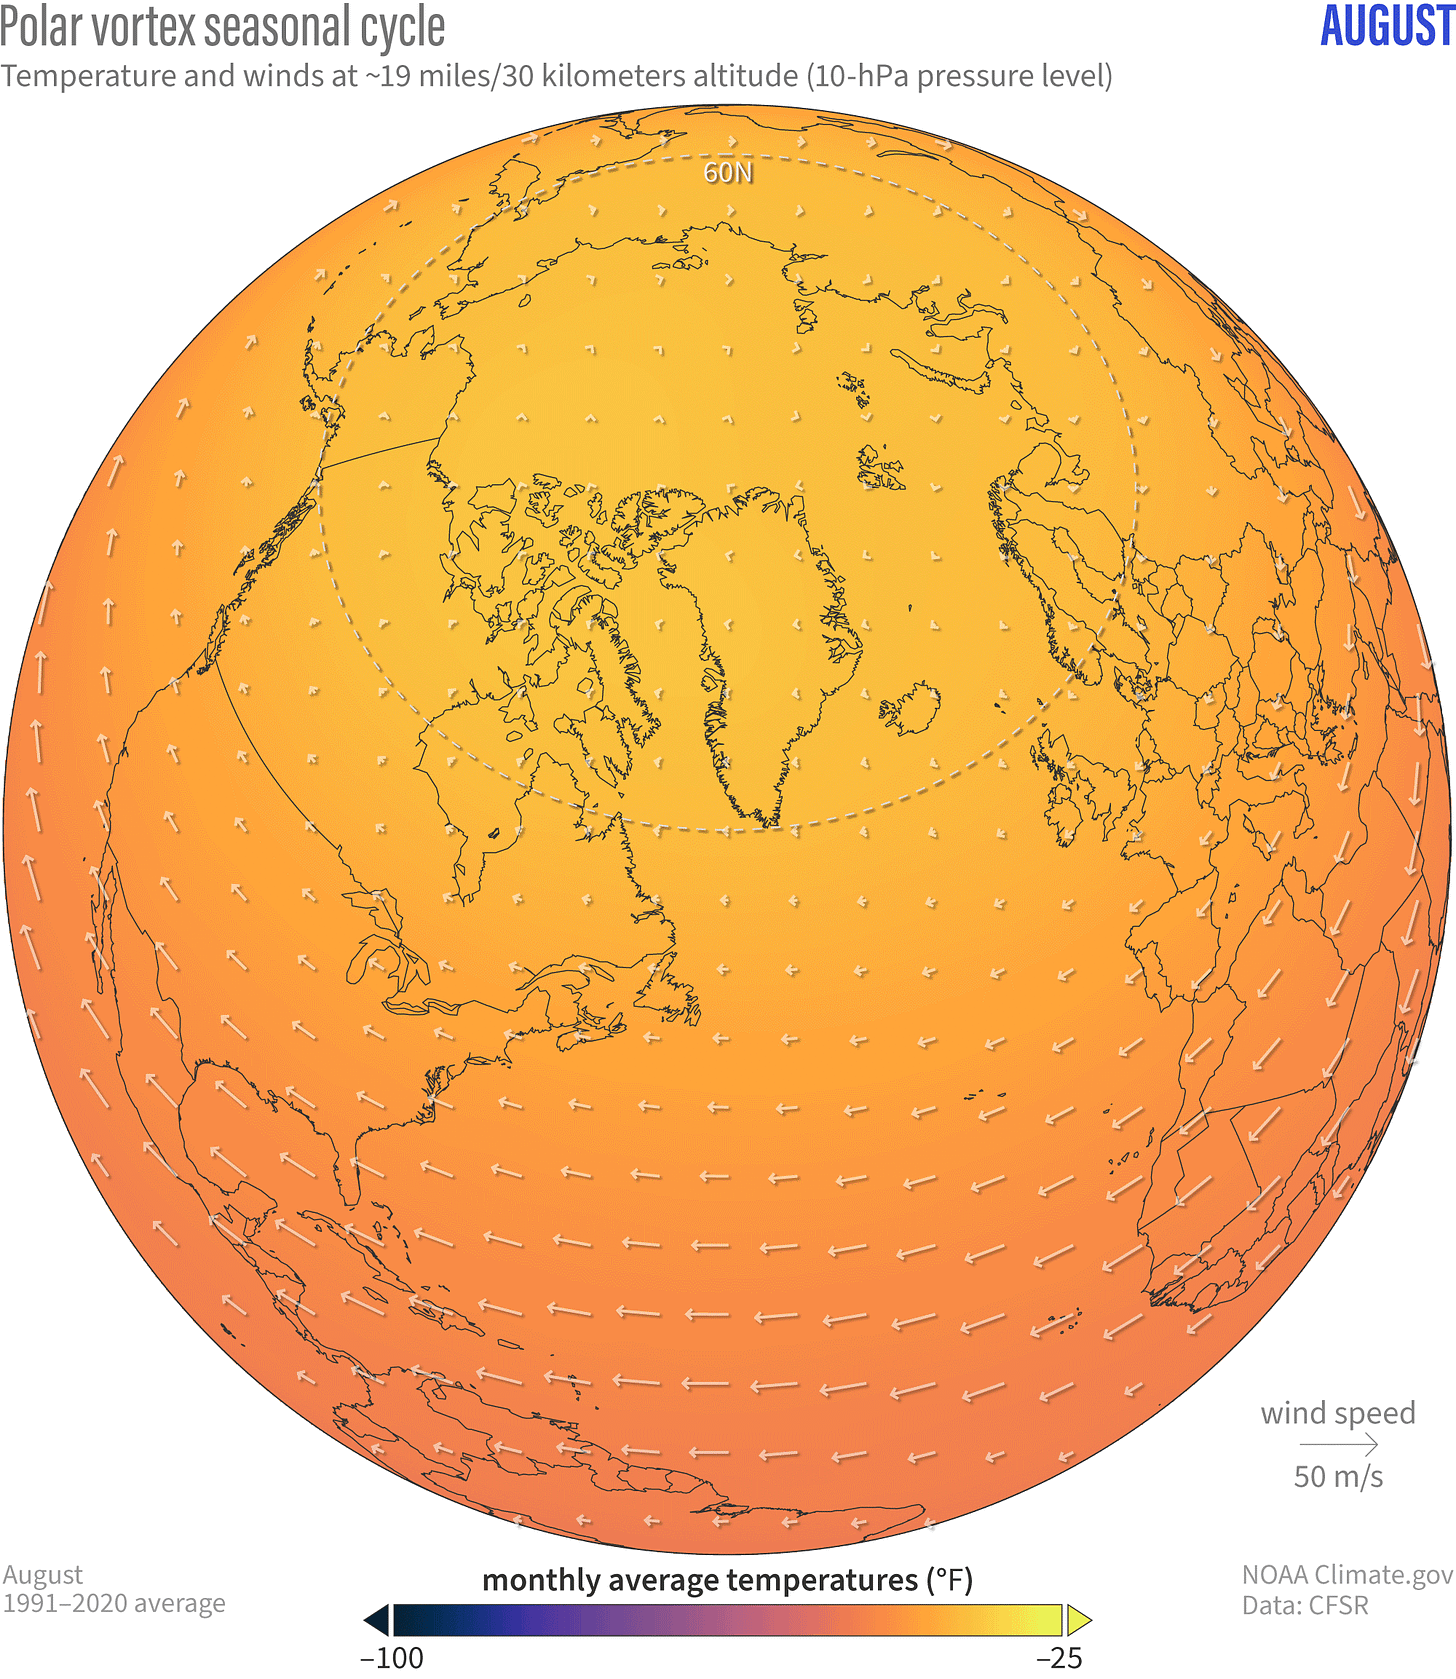 animation of globe-style maps of temperature and wind direction